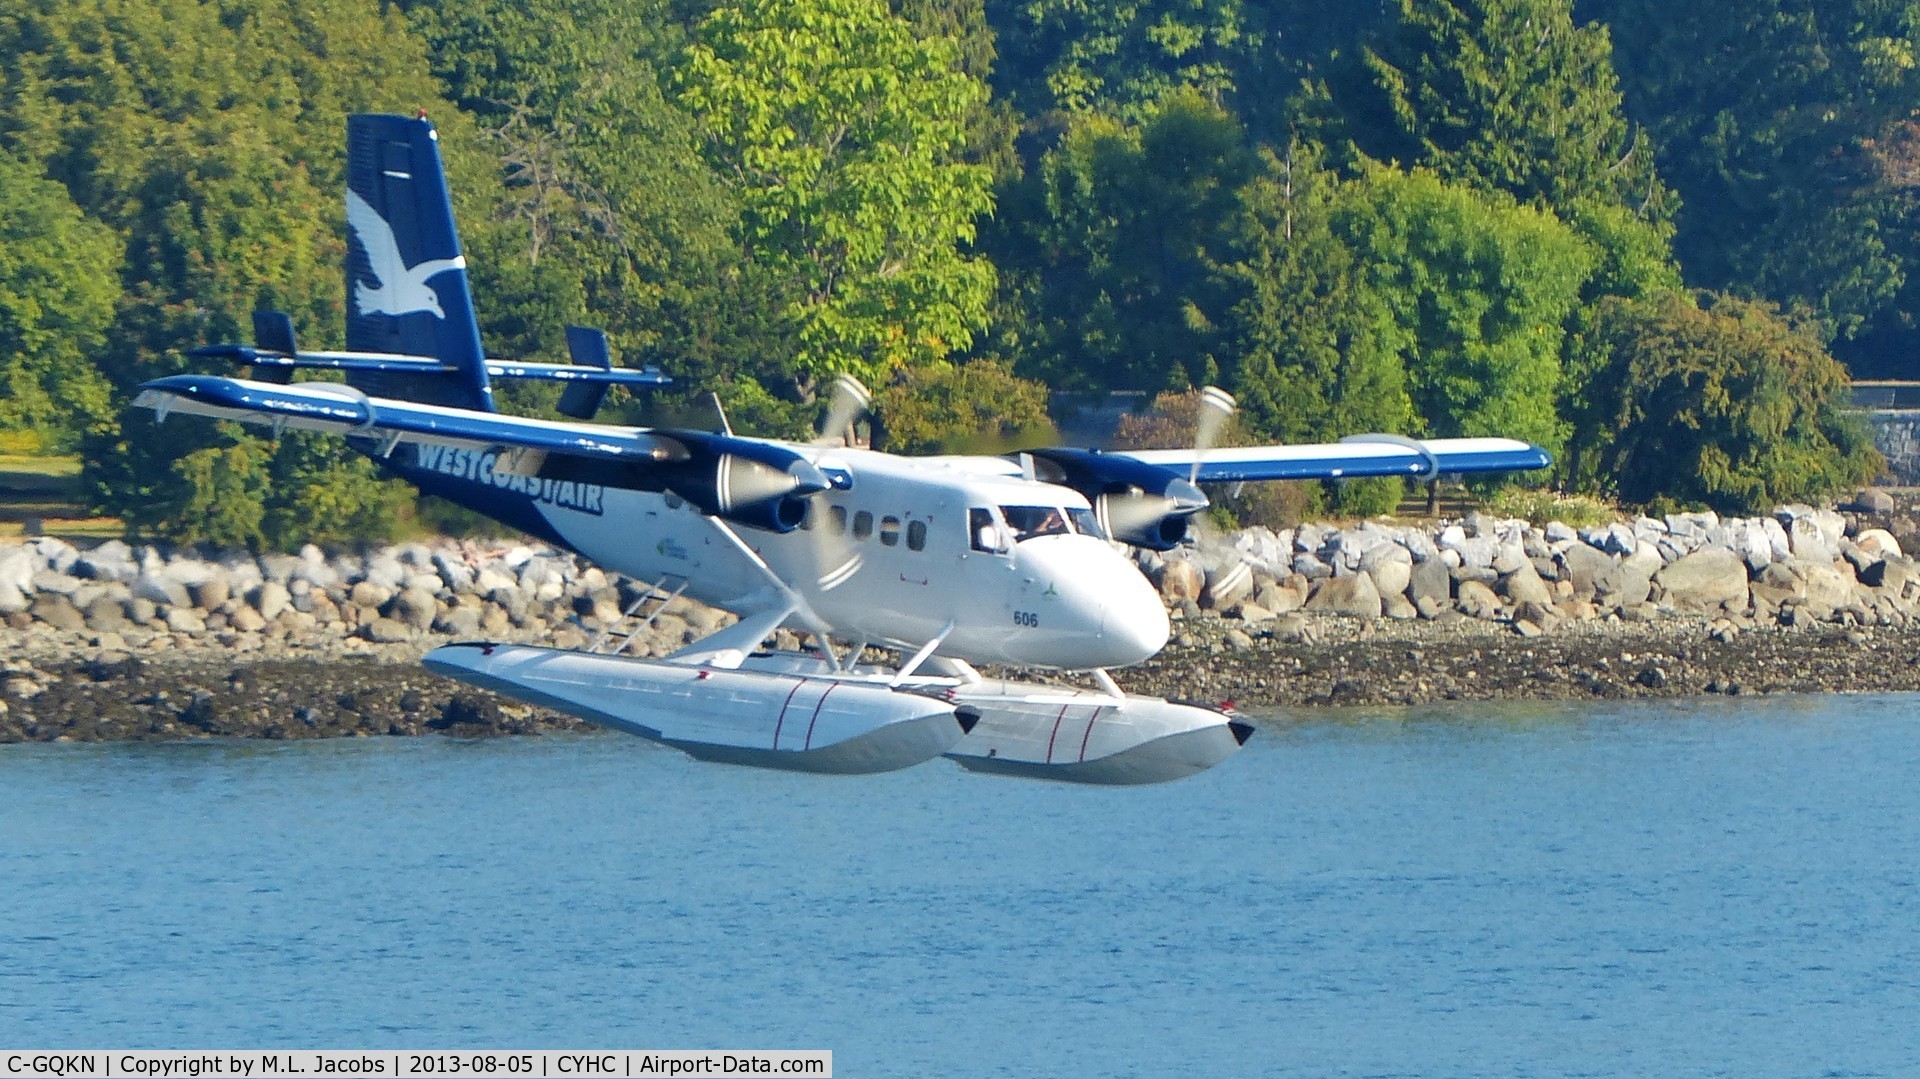 C-GQKN, 1968 De Havilland Canada DHC-6-100 Twin Otter C/N 94, Westcoast Air #606 coming over Stanley Park for a straight in approach to land in Coal Harbour.